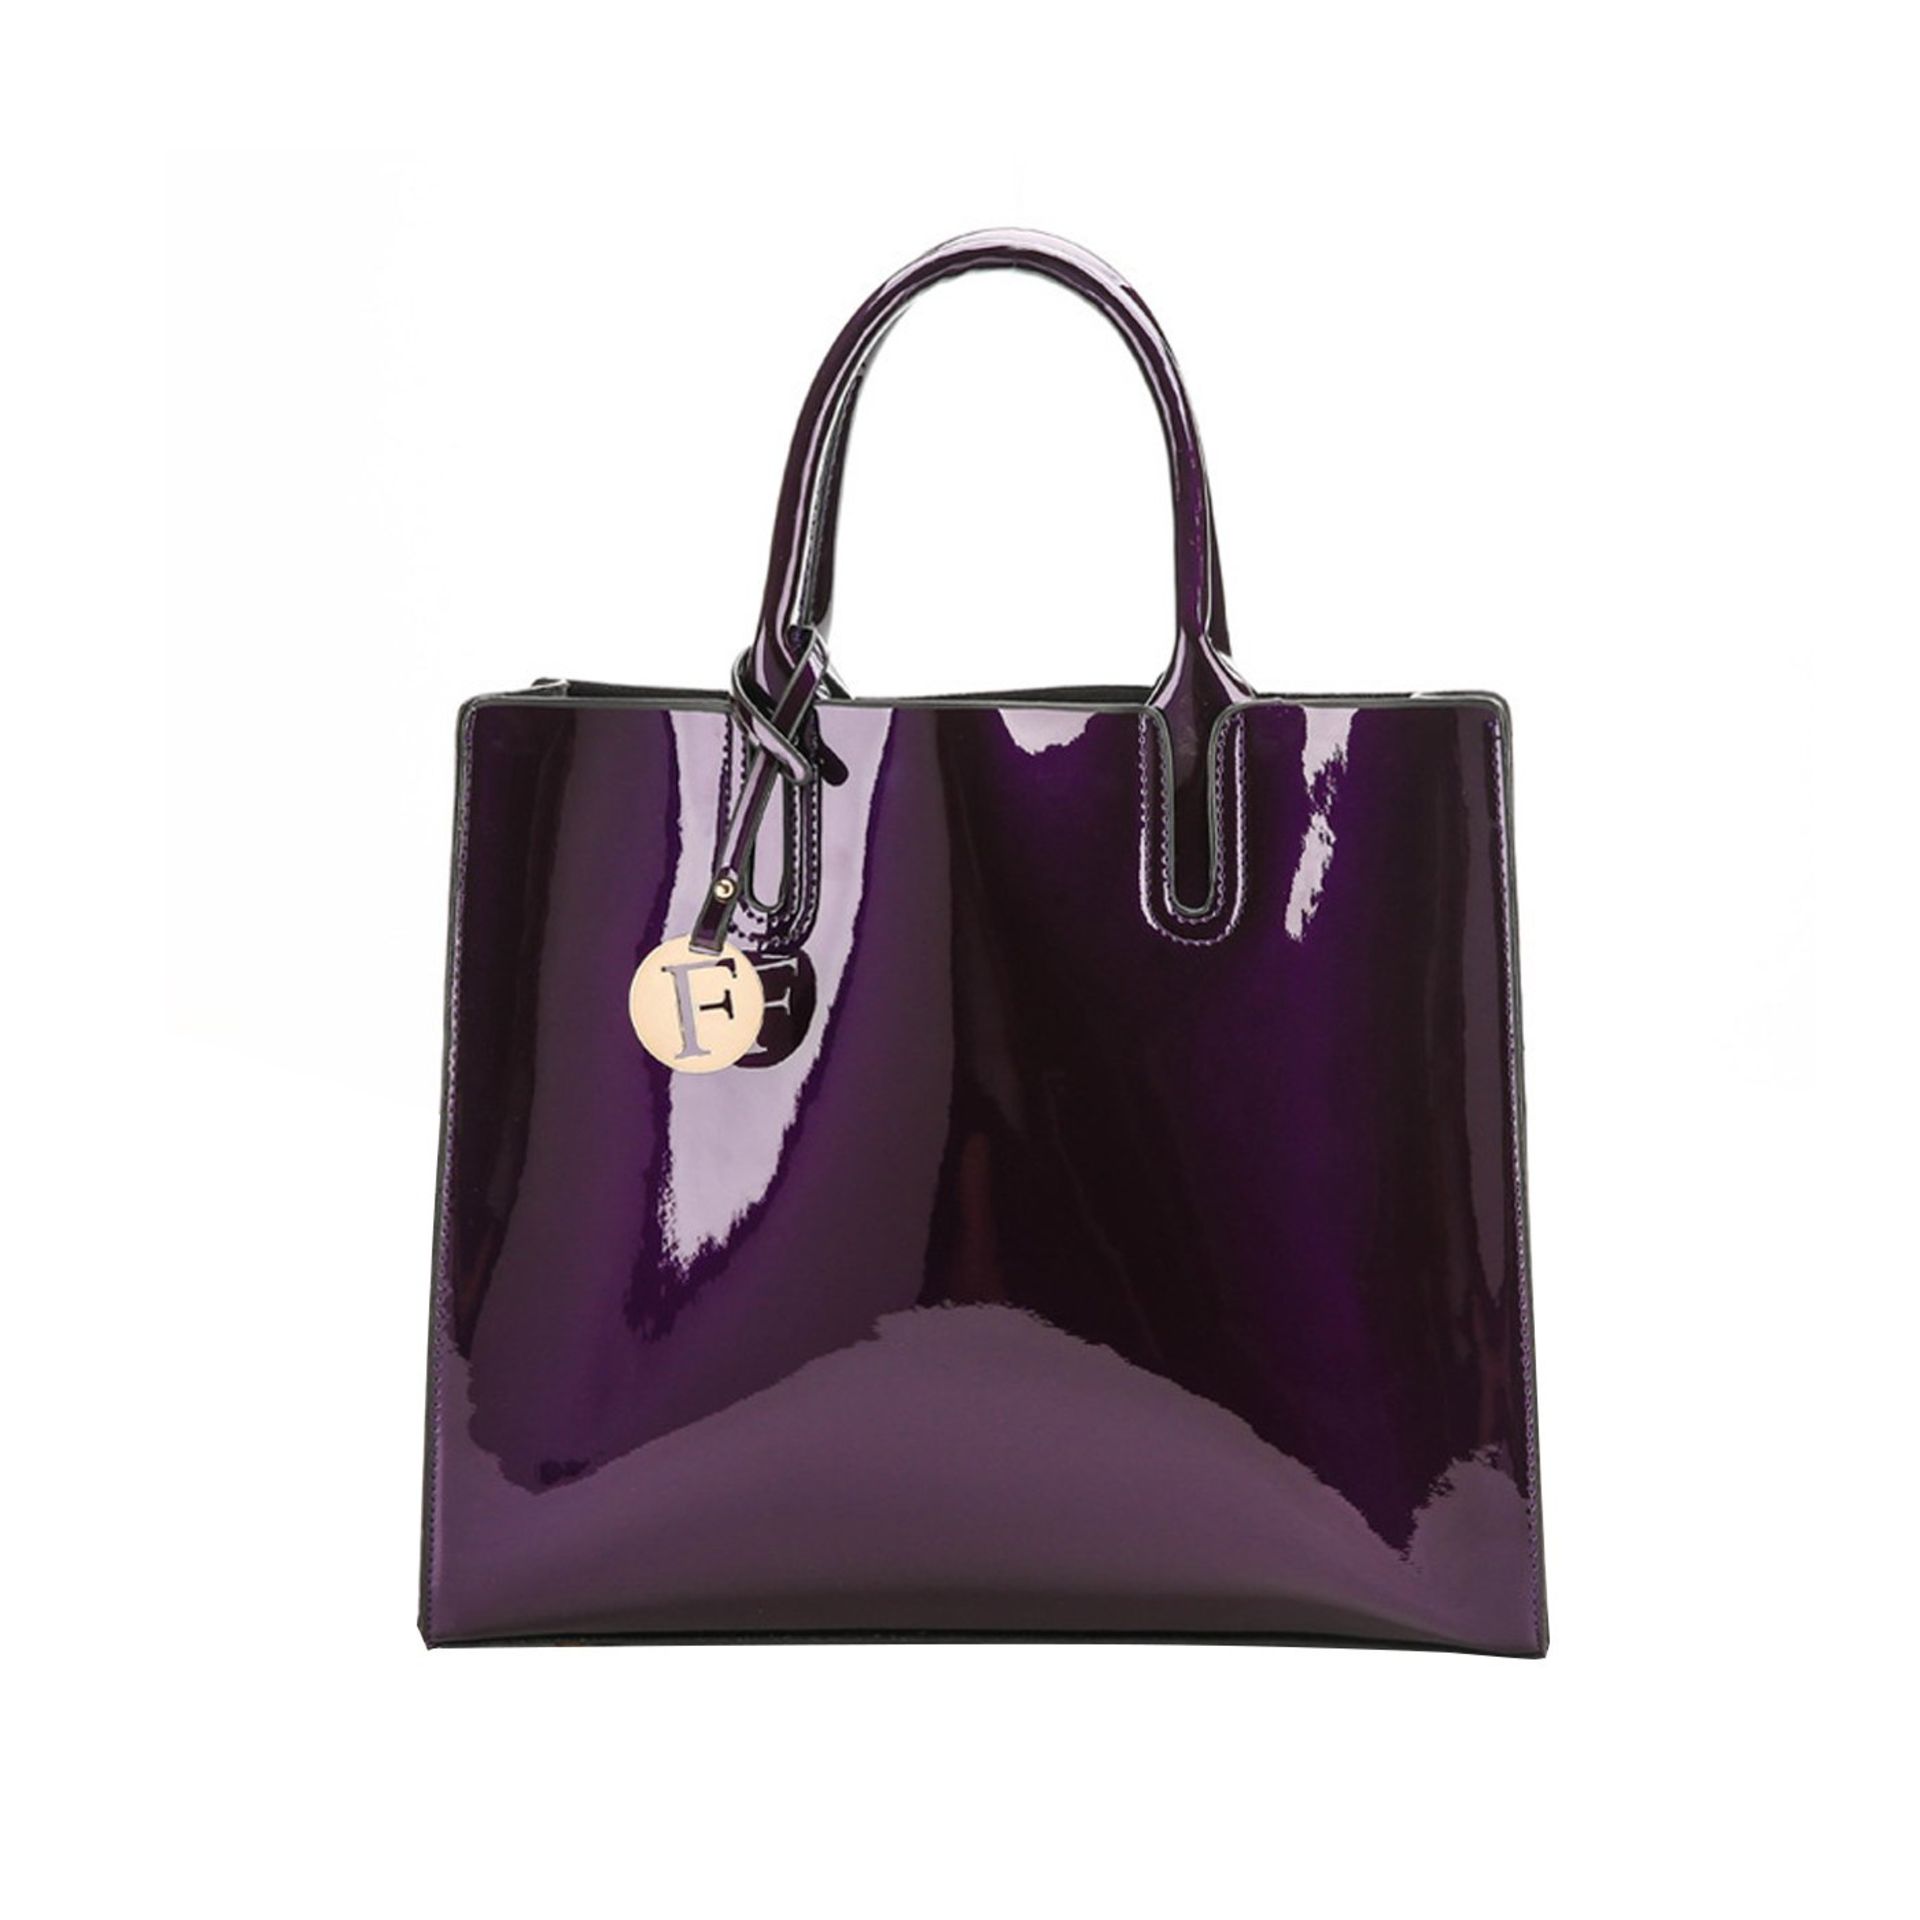 Brand New Women's Coolives Purple Gloss Bag RRP £59.99